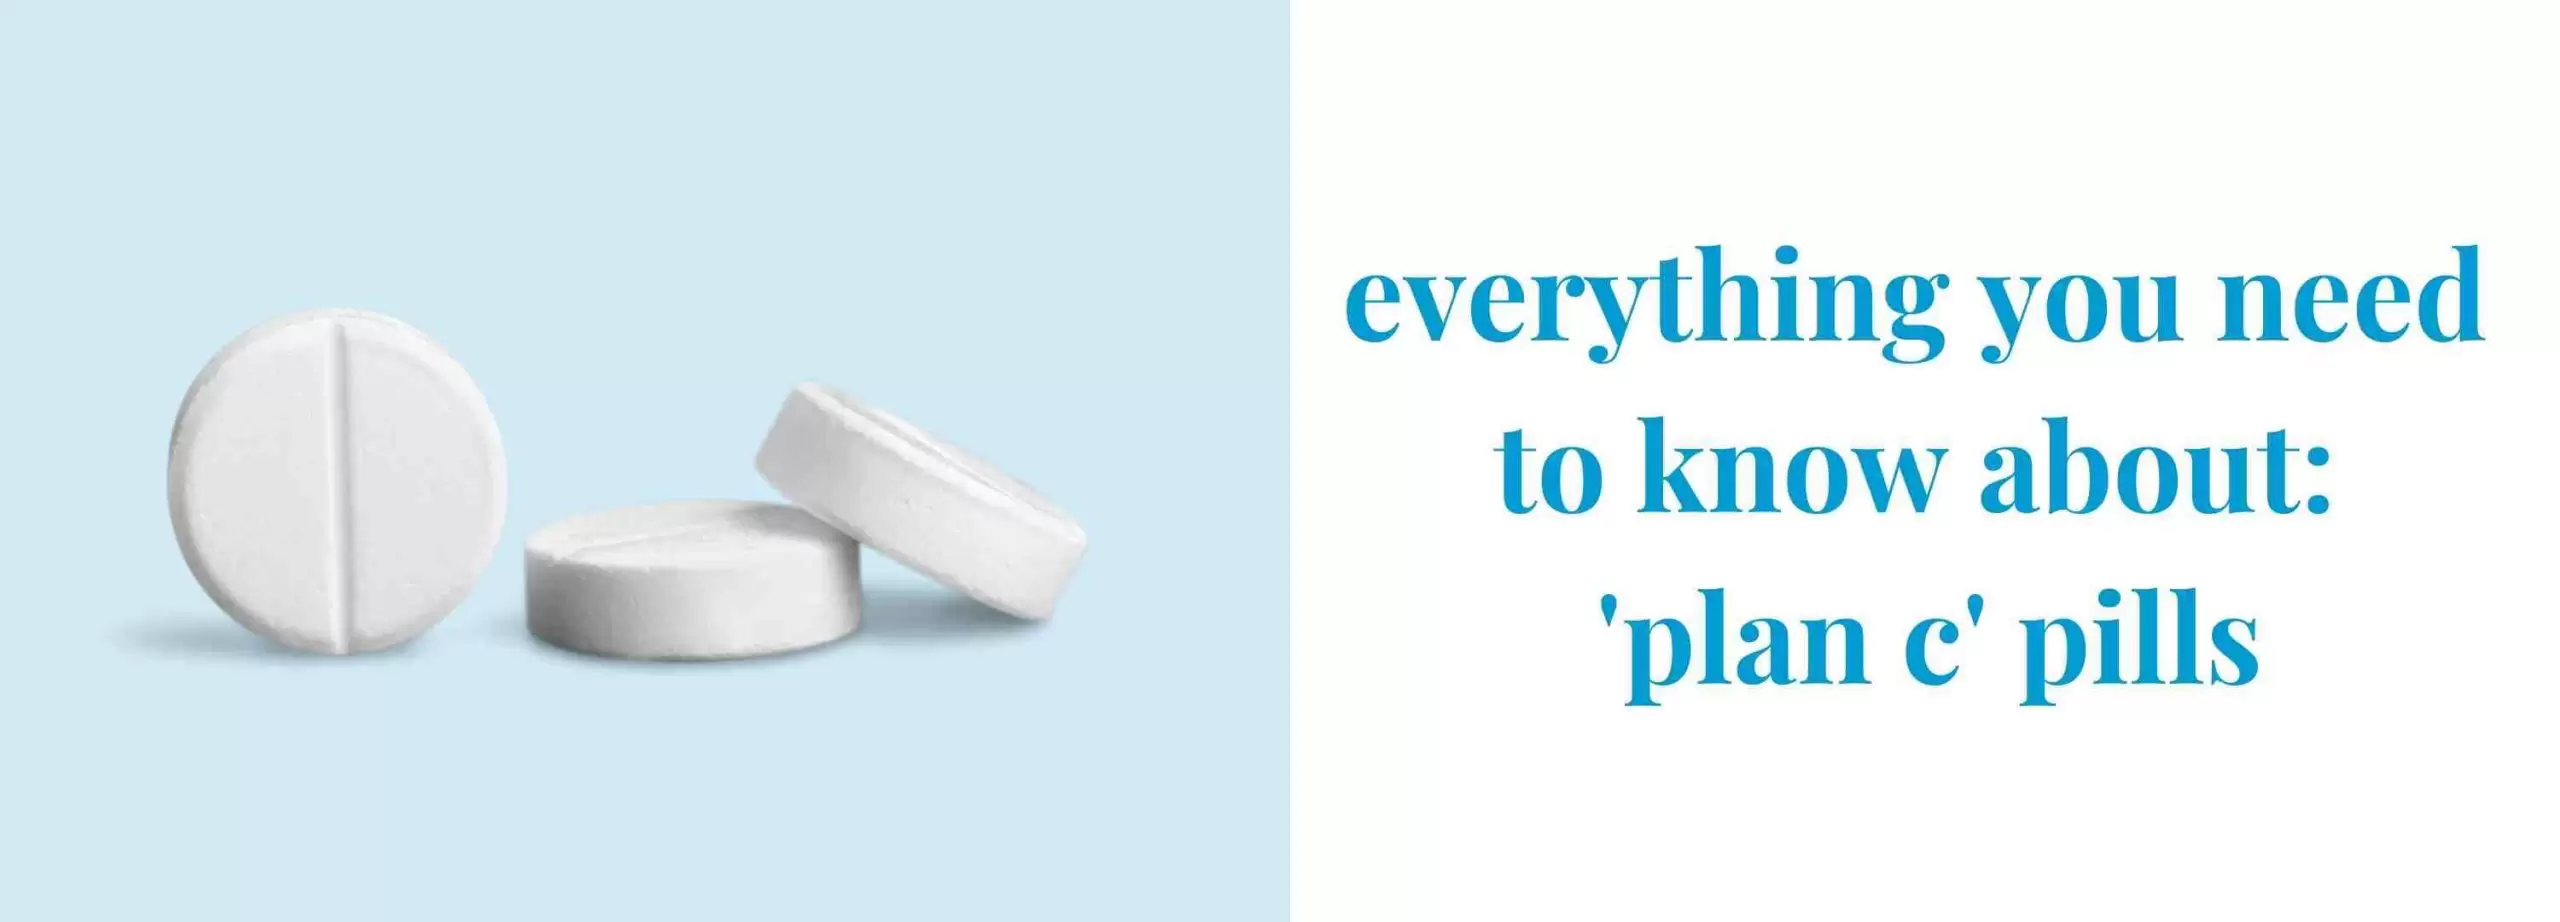 Plan C Pills (Medication Abortion, Medical Abortion, Abortion Pills): Your Questions Answered